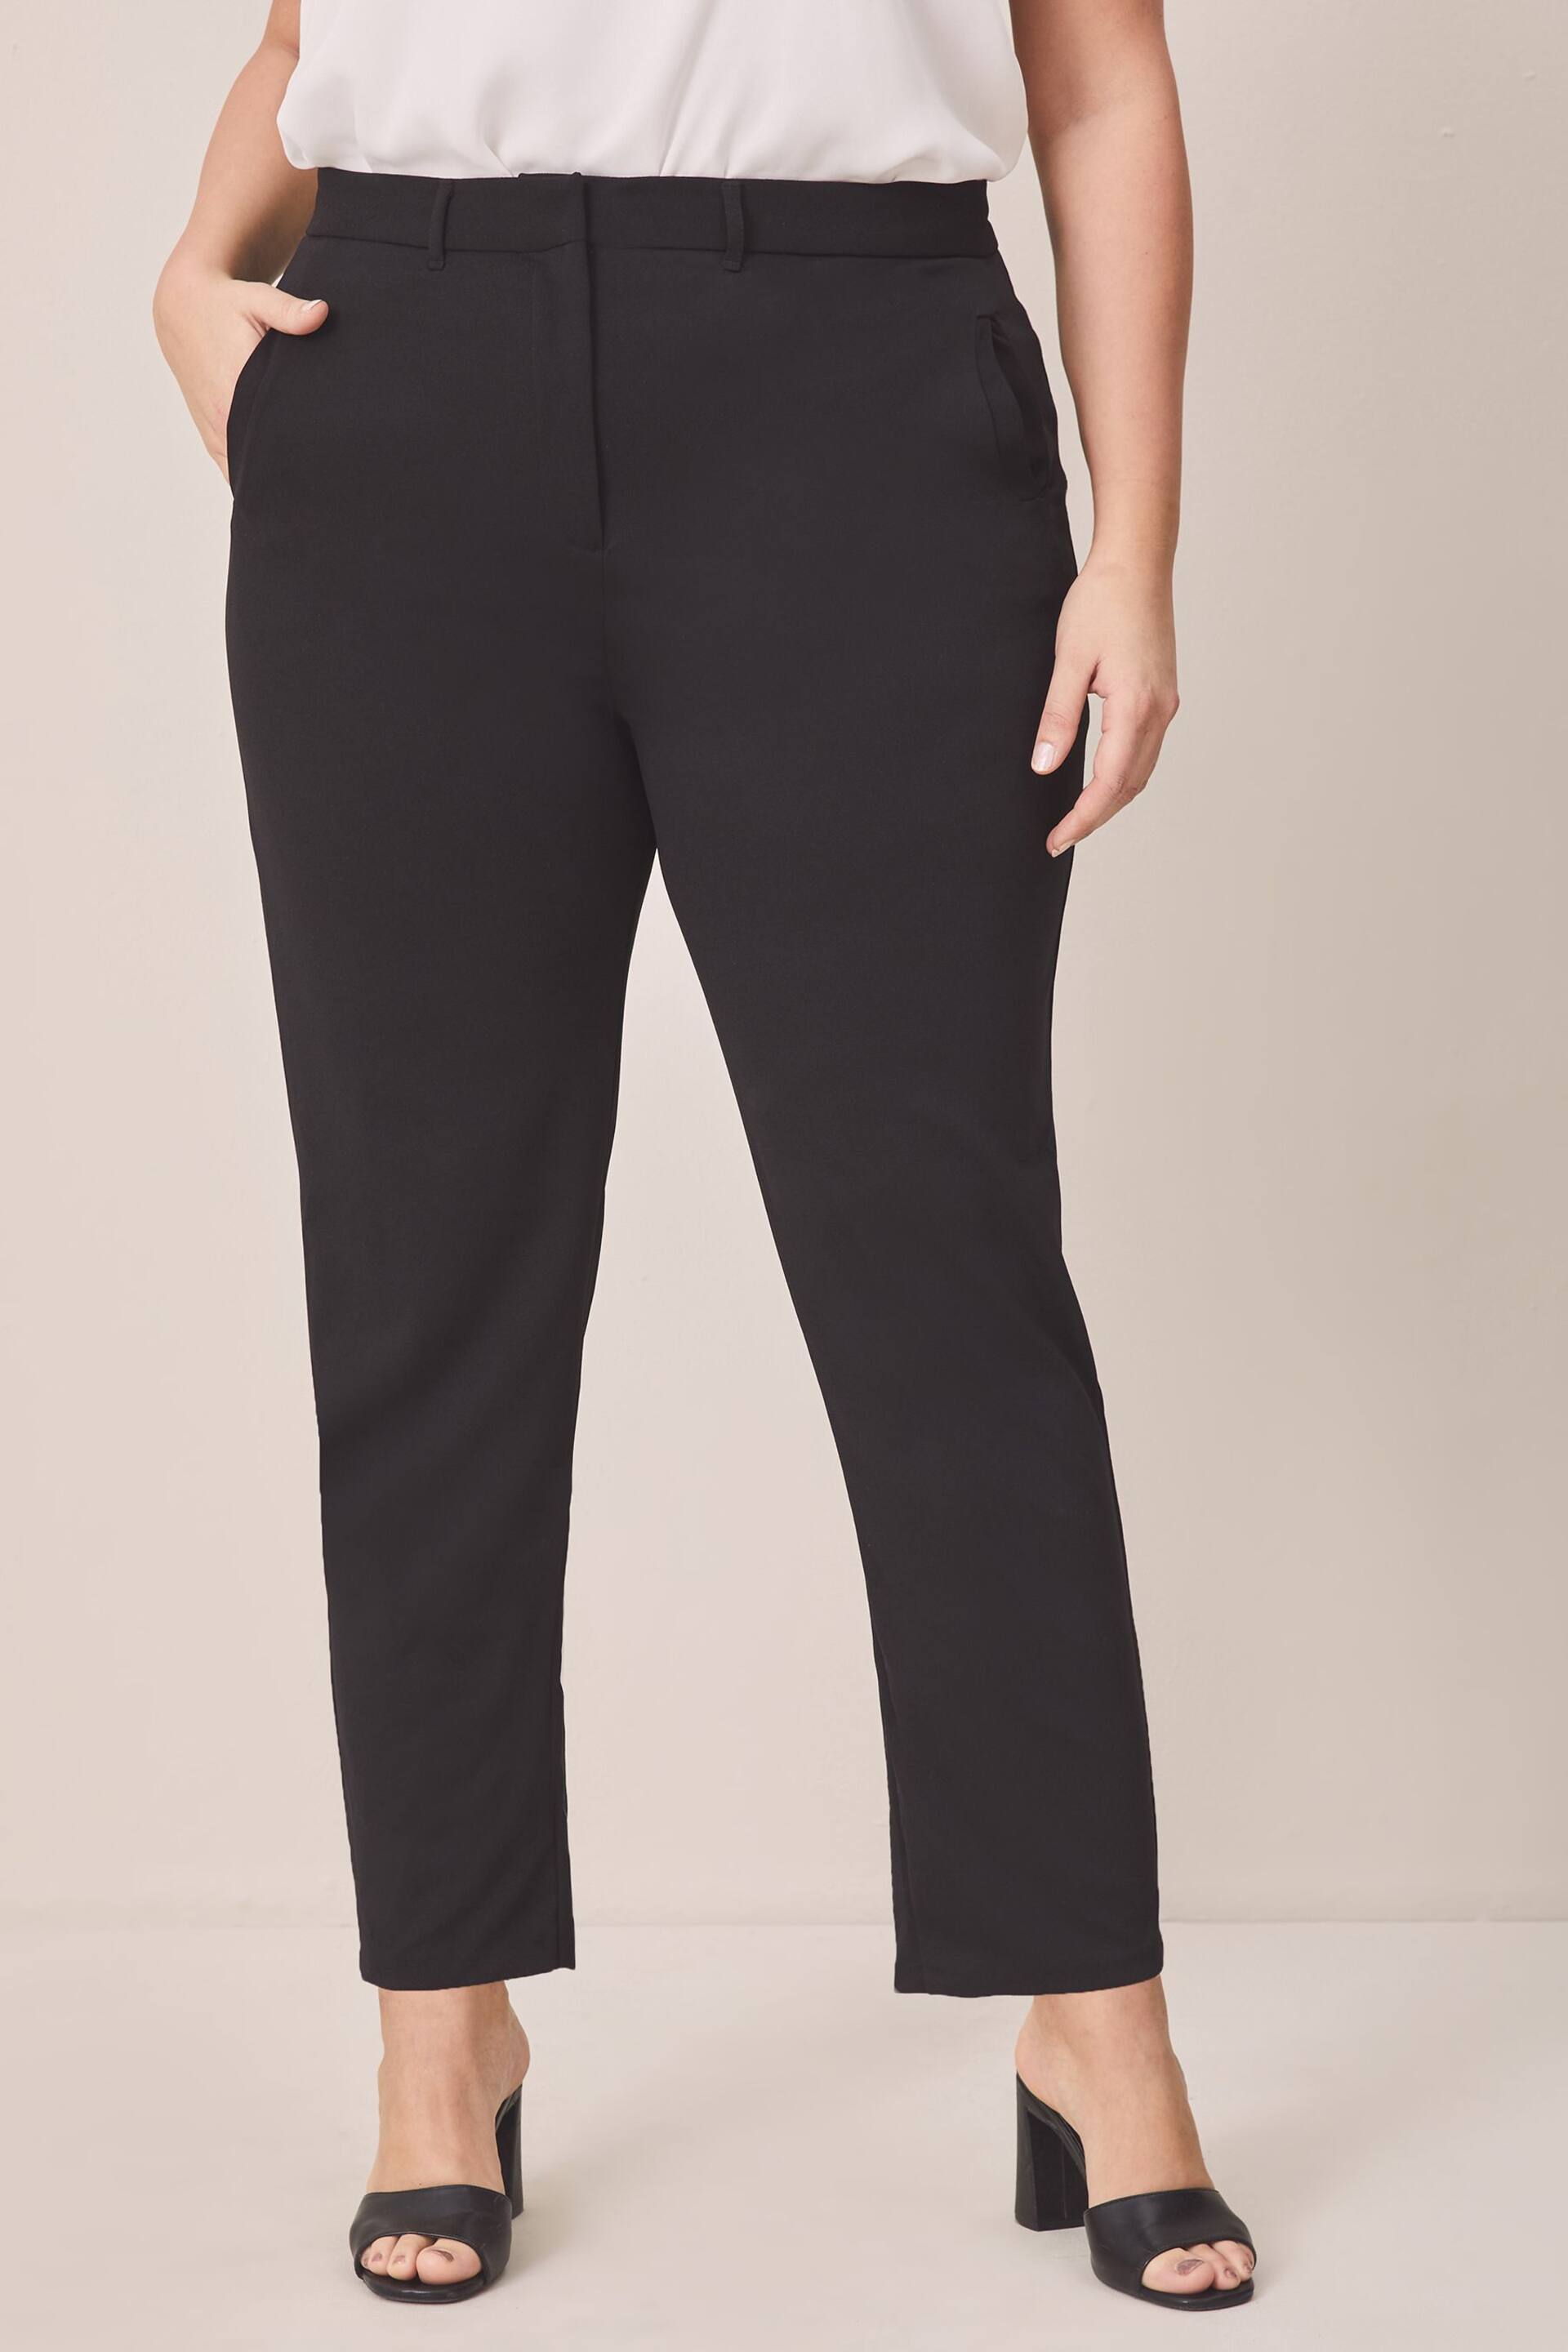 Lipsy Black Curve Smart Tapered Trouser - Image 1 of 4